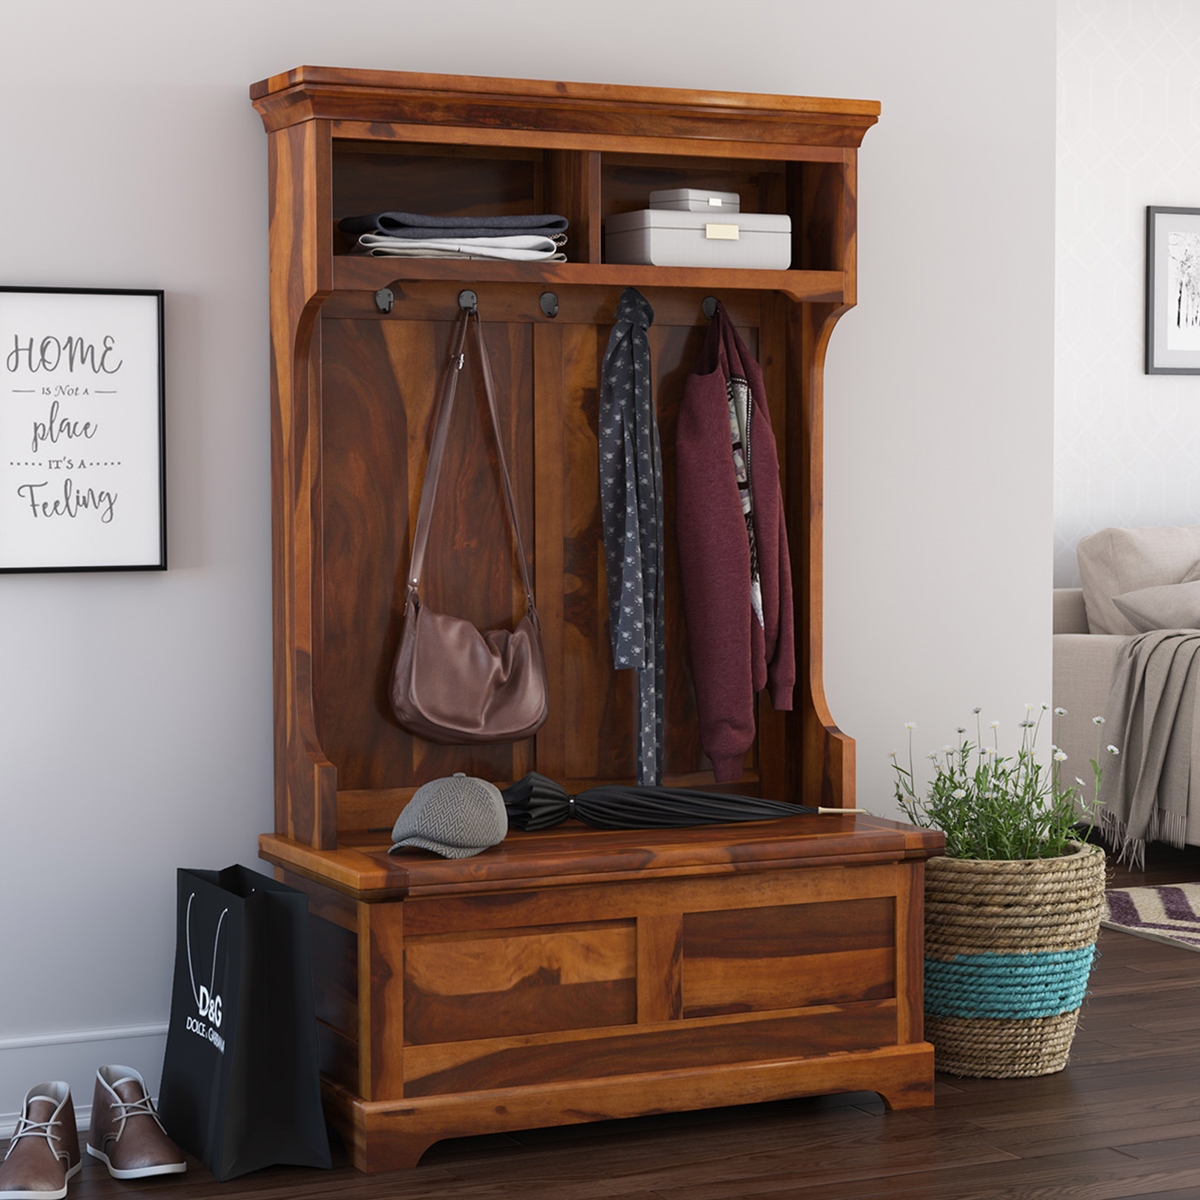 Owensville Rustic Solid Wood Entryway Hall Tree Bench with Storage.